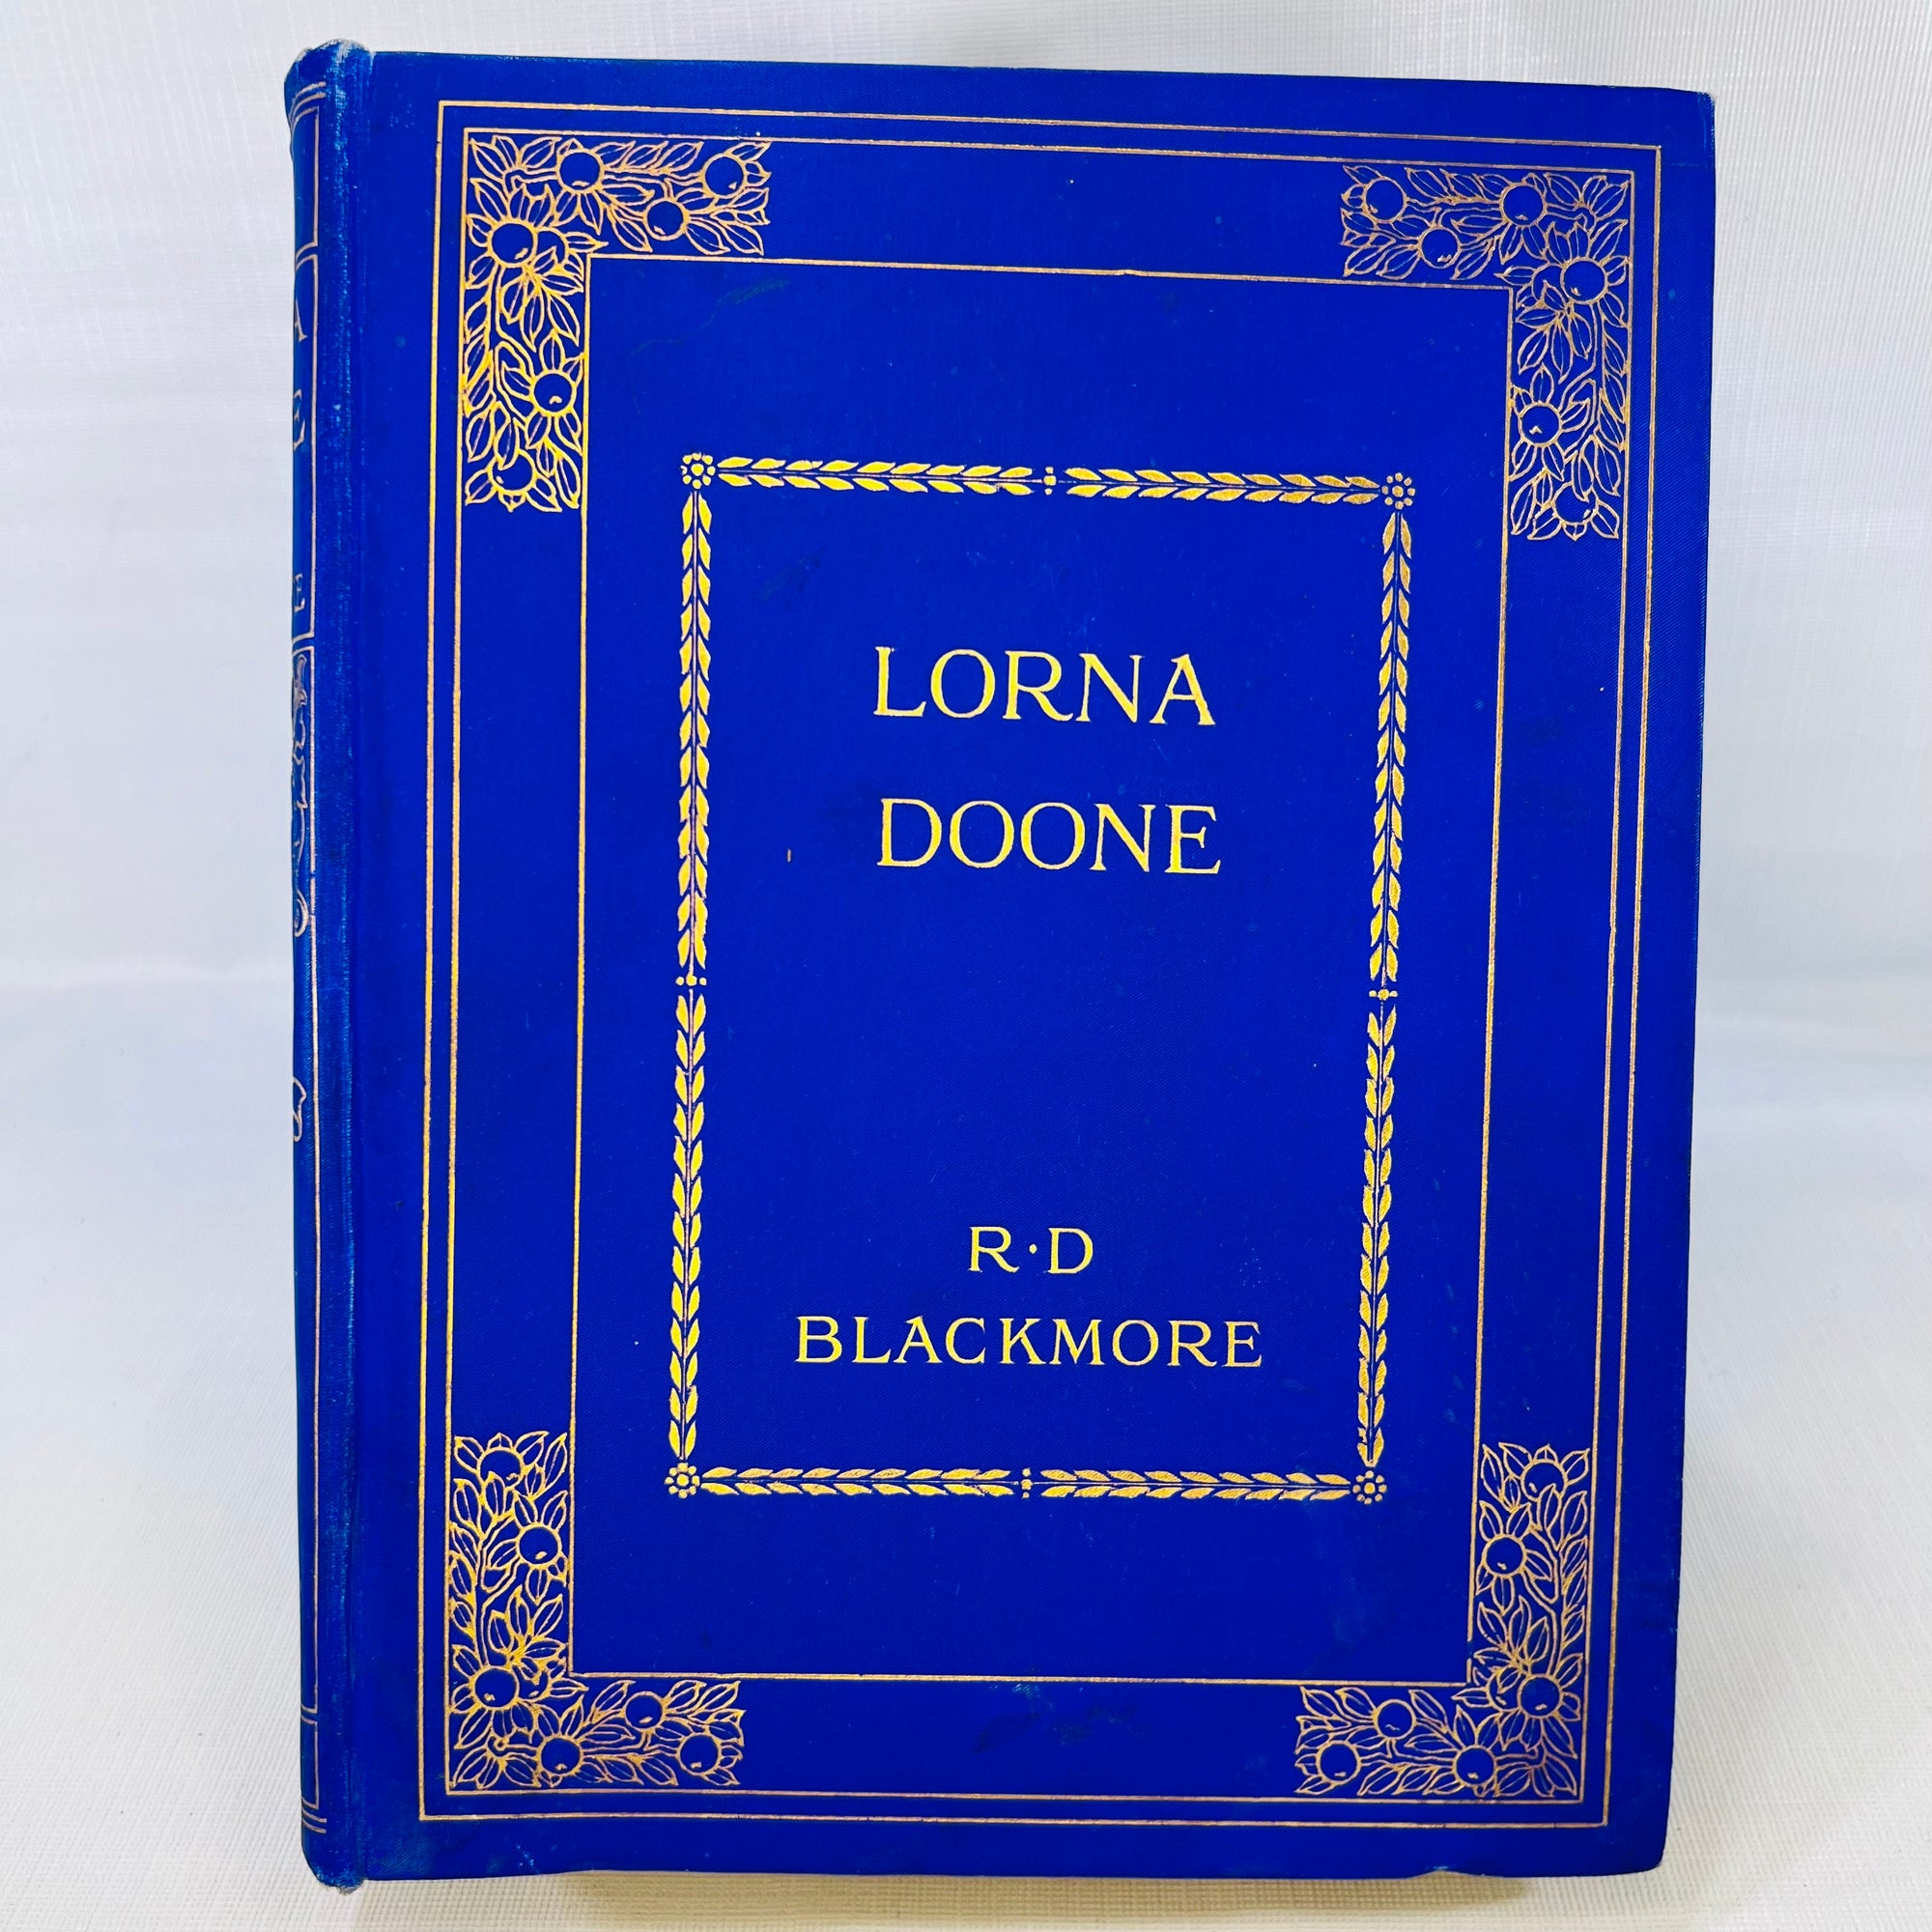 Lorna Doone  A Romance of Exmoor by R.D. Blackmore with Colored Ill c.1930s Illustrations by C.E. Brock Boots the Chemist